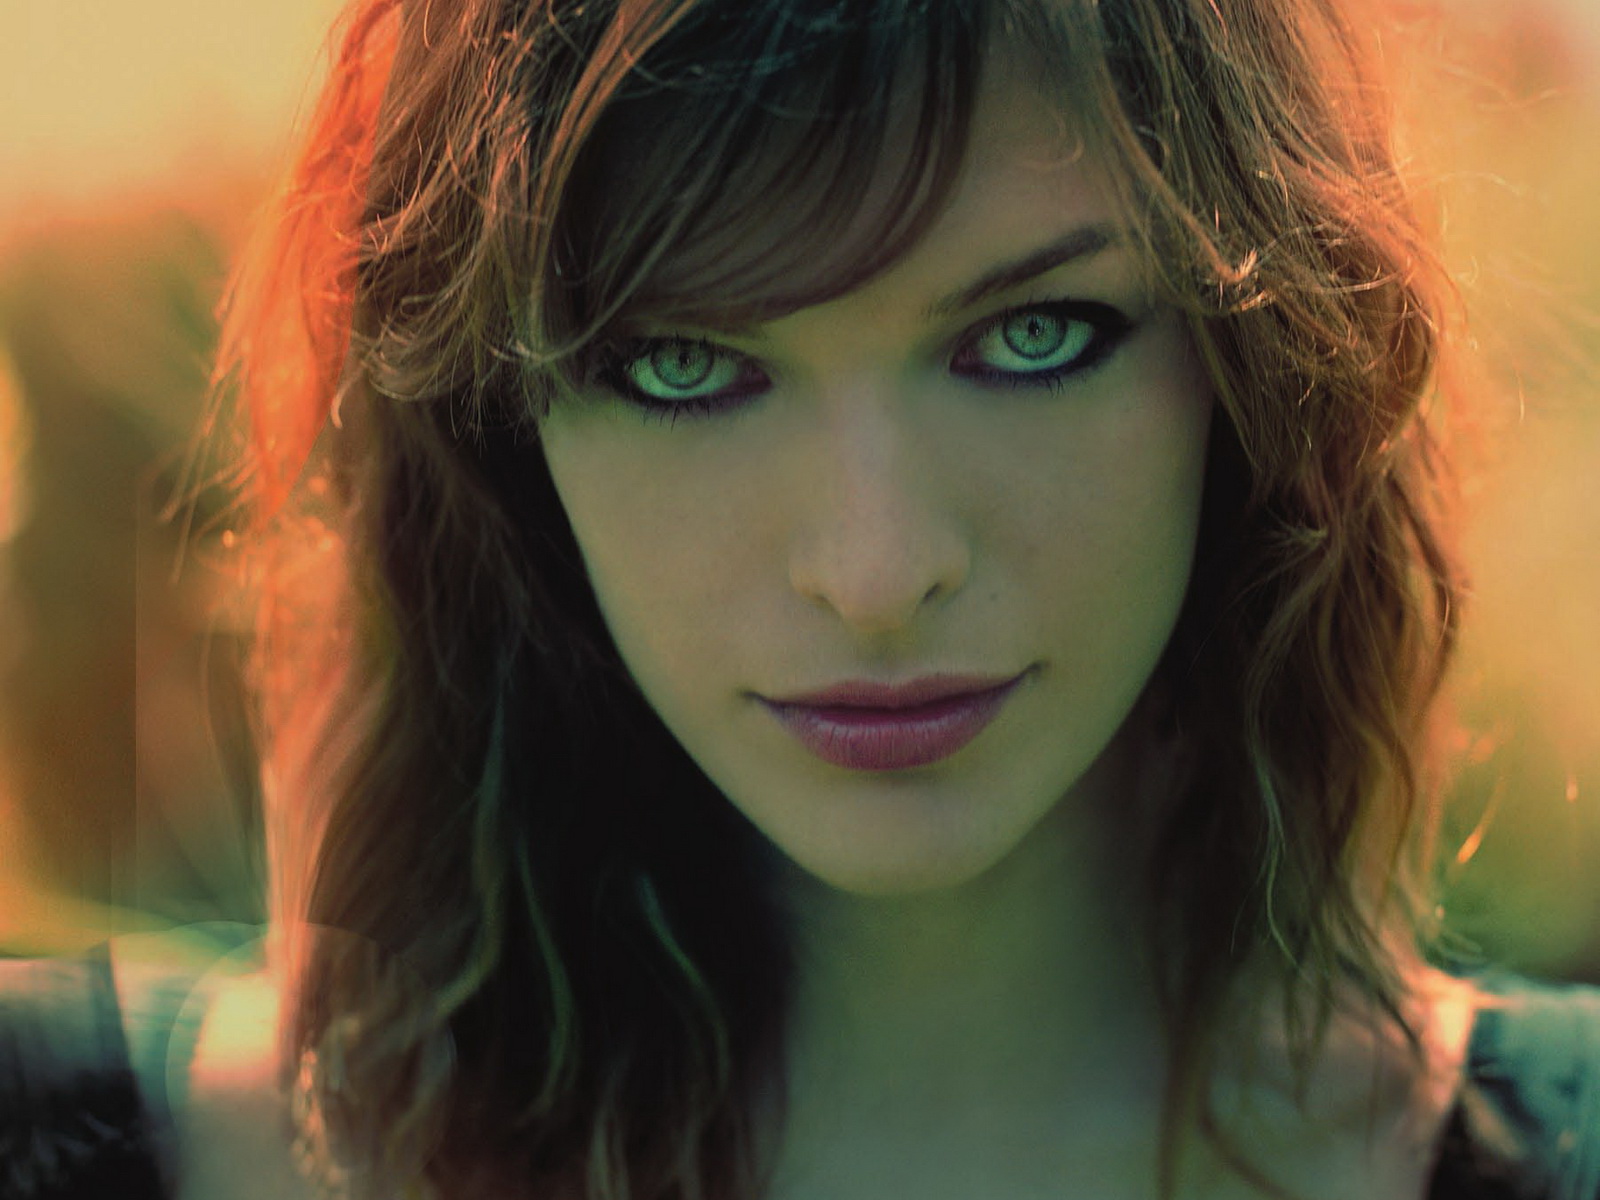 Milla Jovovich Is An American Model Actress Musician And Fashion